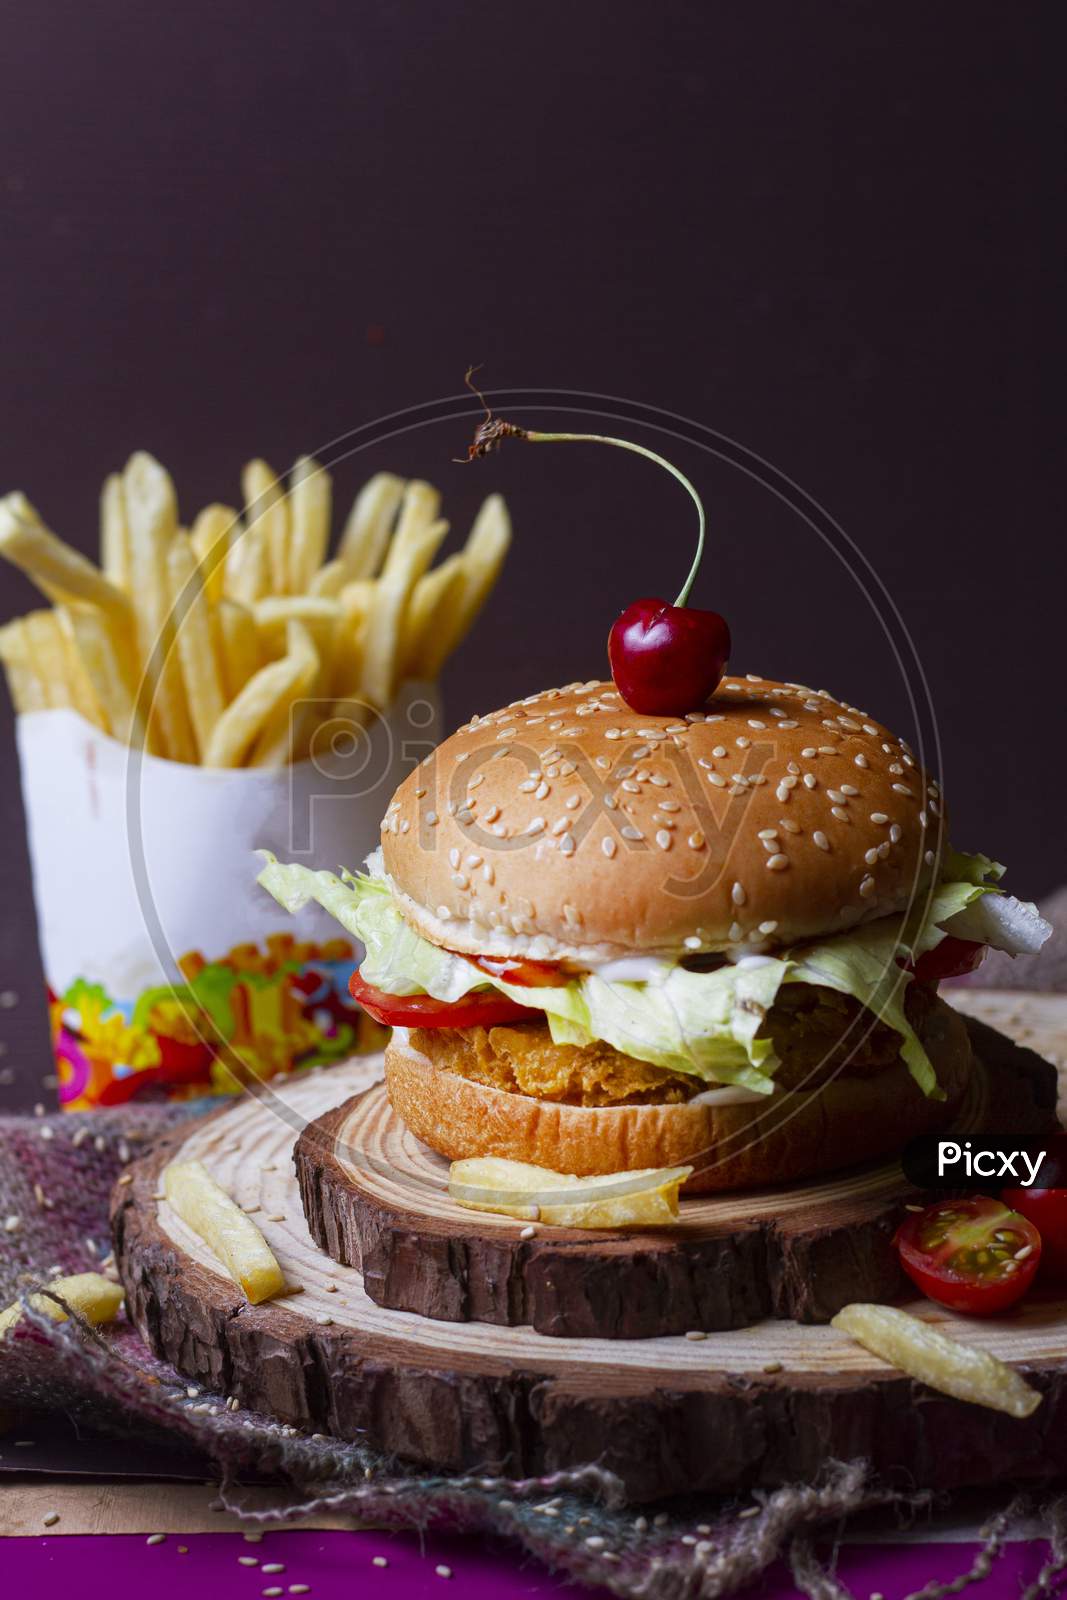 Juicy Mexican Burger, Hamburger Or Cheeseburger With One Chicken Patties, With Sauce,French Fries And Cold Drink. Concept Of Mexican Fast Food. Copy Space